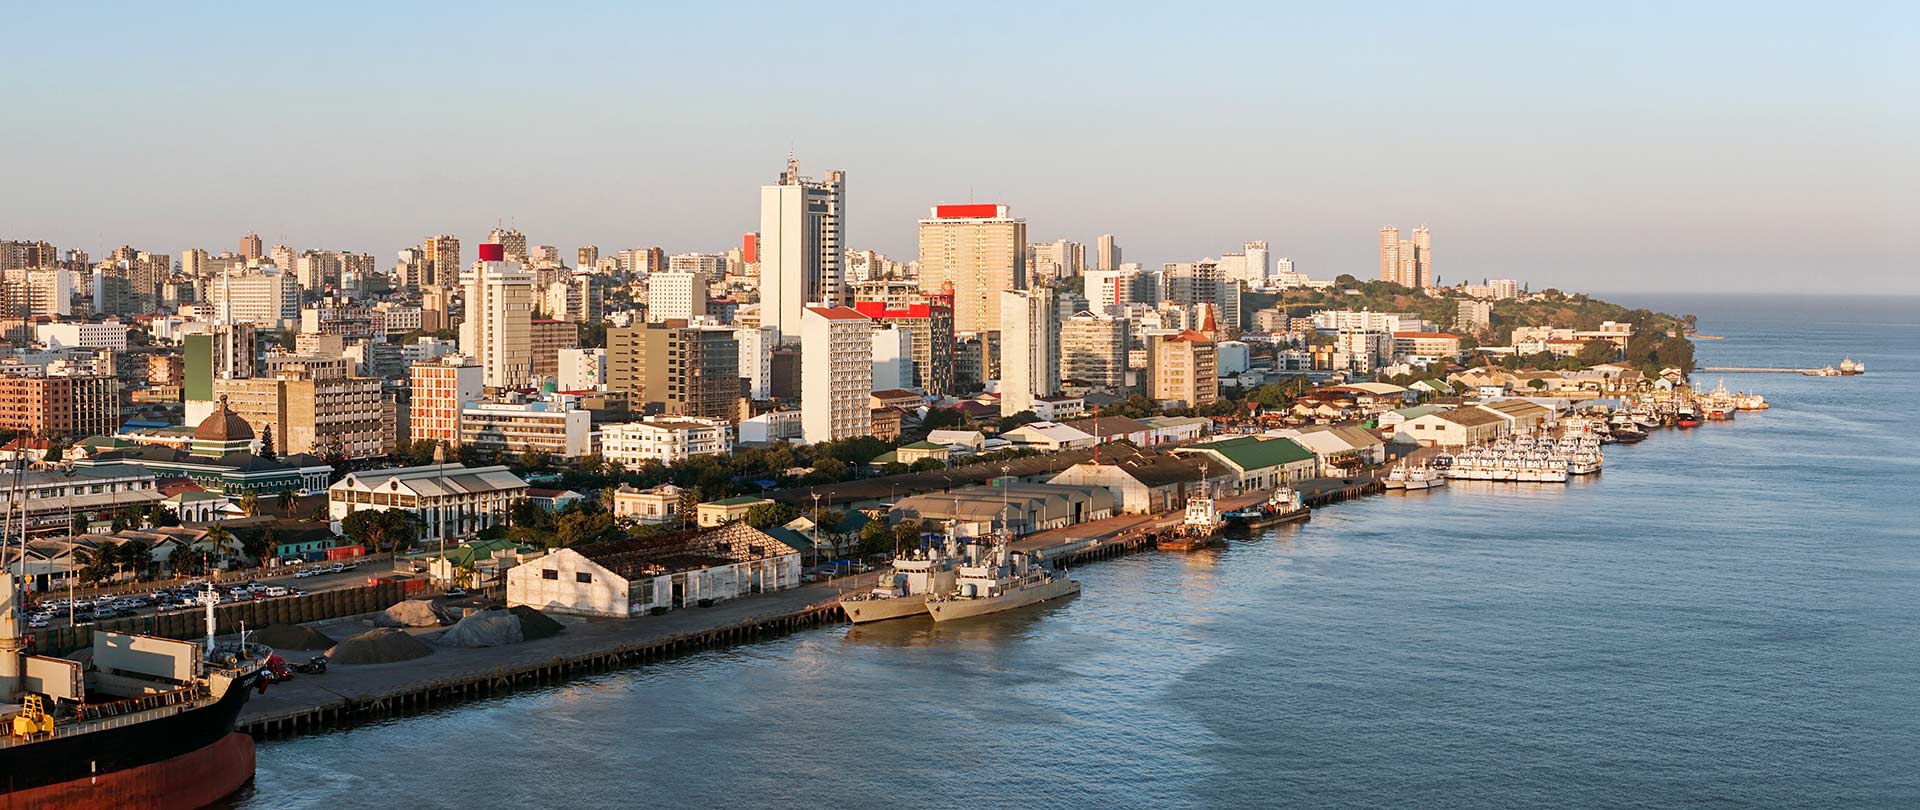 A cityscape view of maputo from the harbor